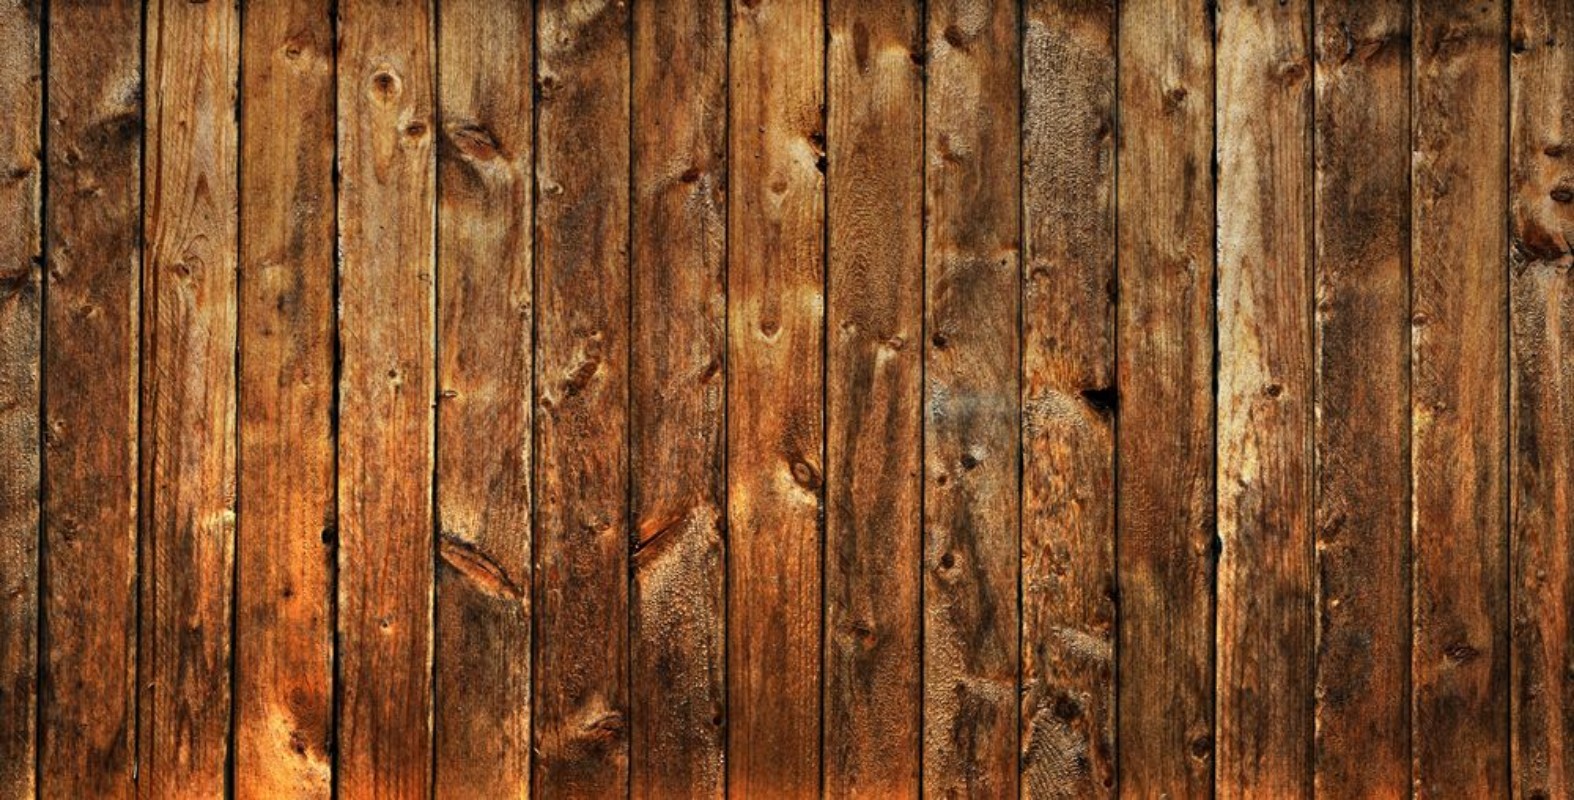 Image de Old worn out wooden planks background